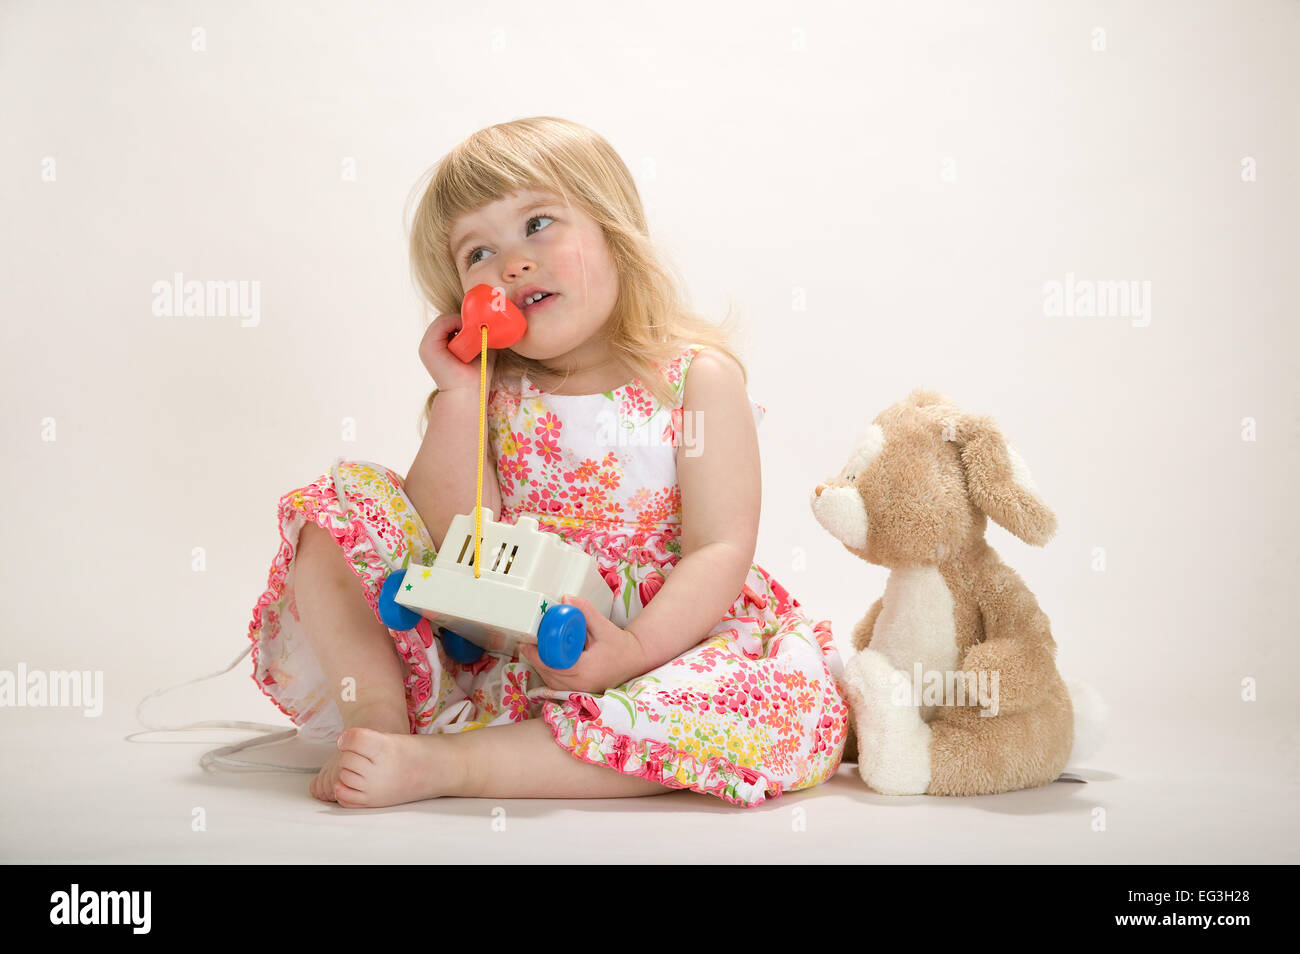 Toddler girl (2.5 years old) playing, talking on a toy telephone.  Concepts: boredom, weariness, imagination, make-believe Stock Photo